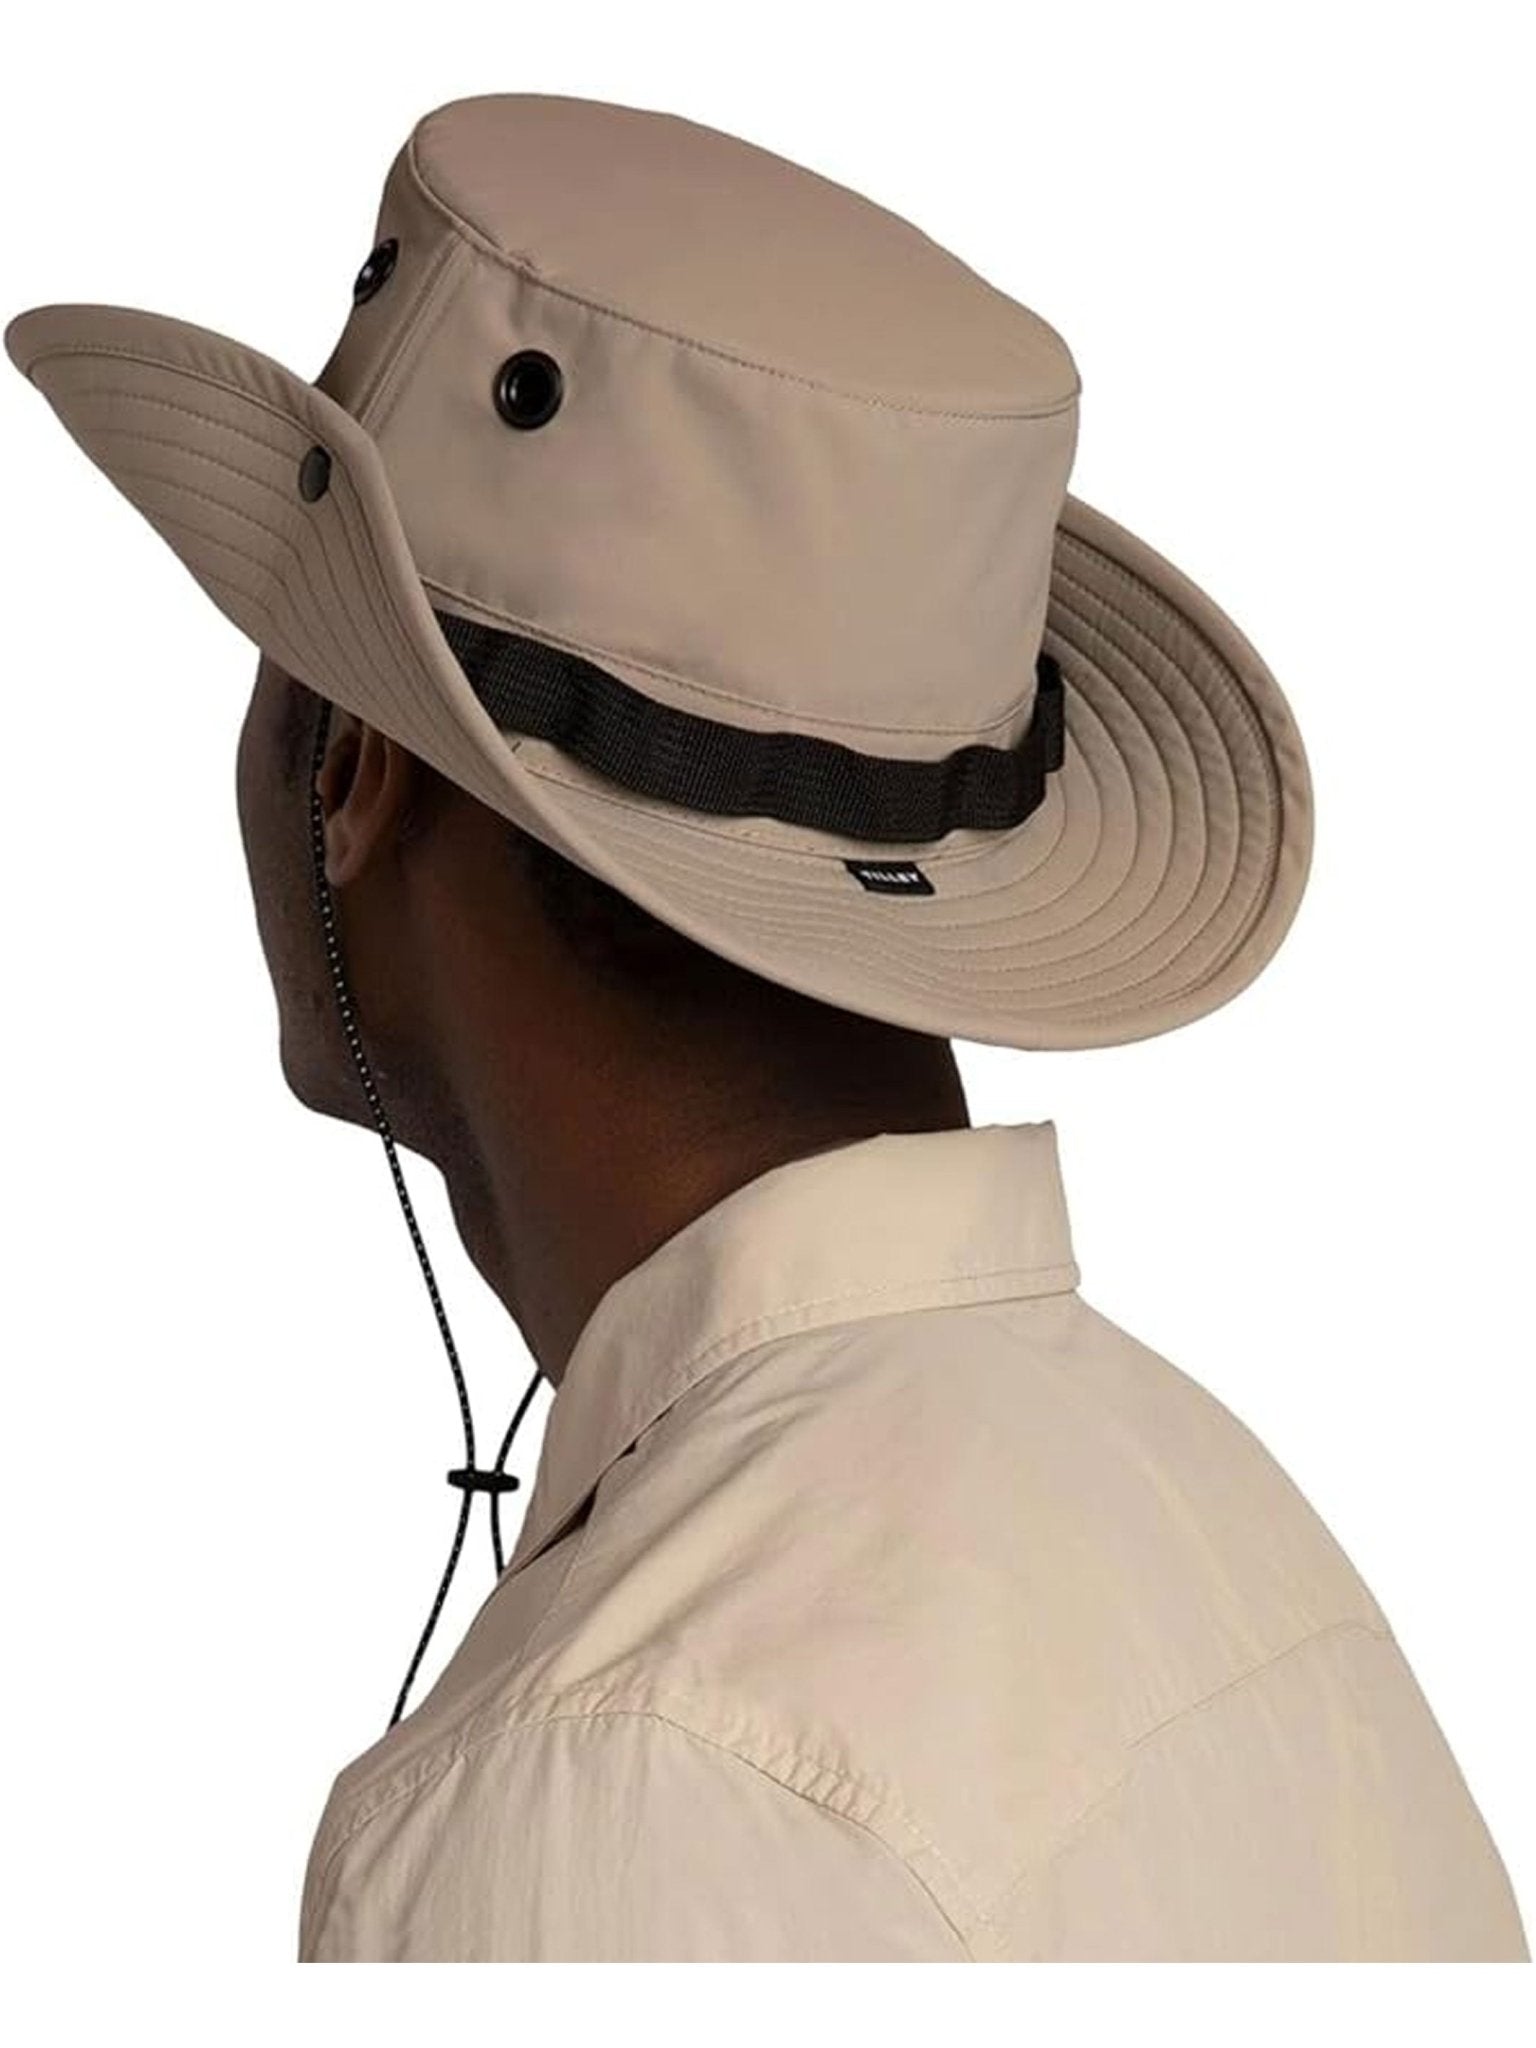 Tilley - Tilley Endurables 100% Recycled Utility Hat - UPF 50+ sun protection